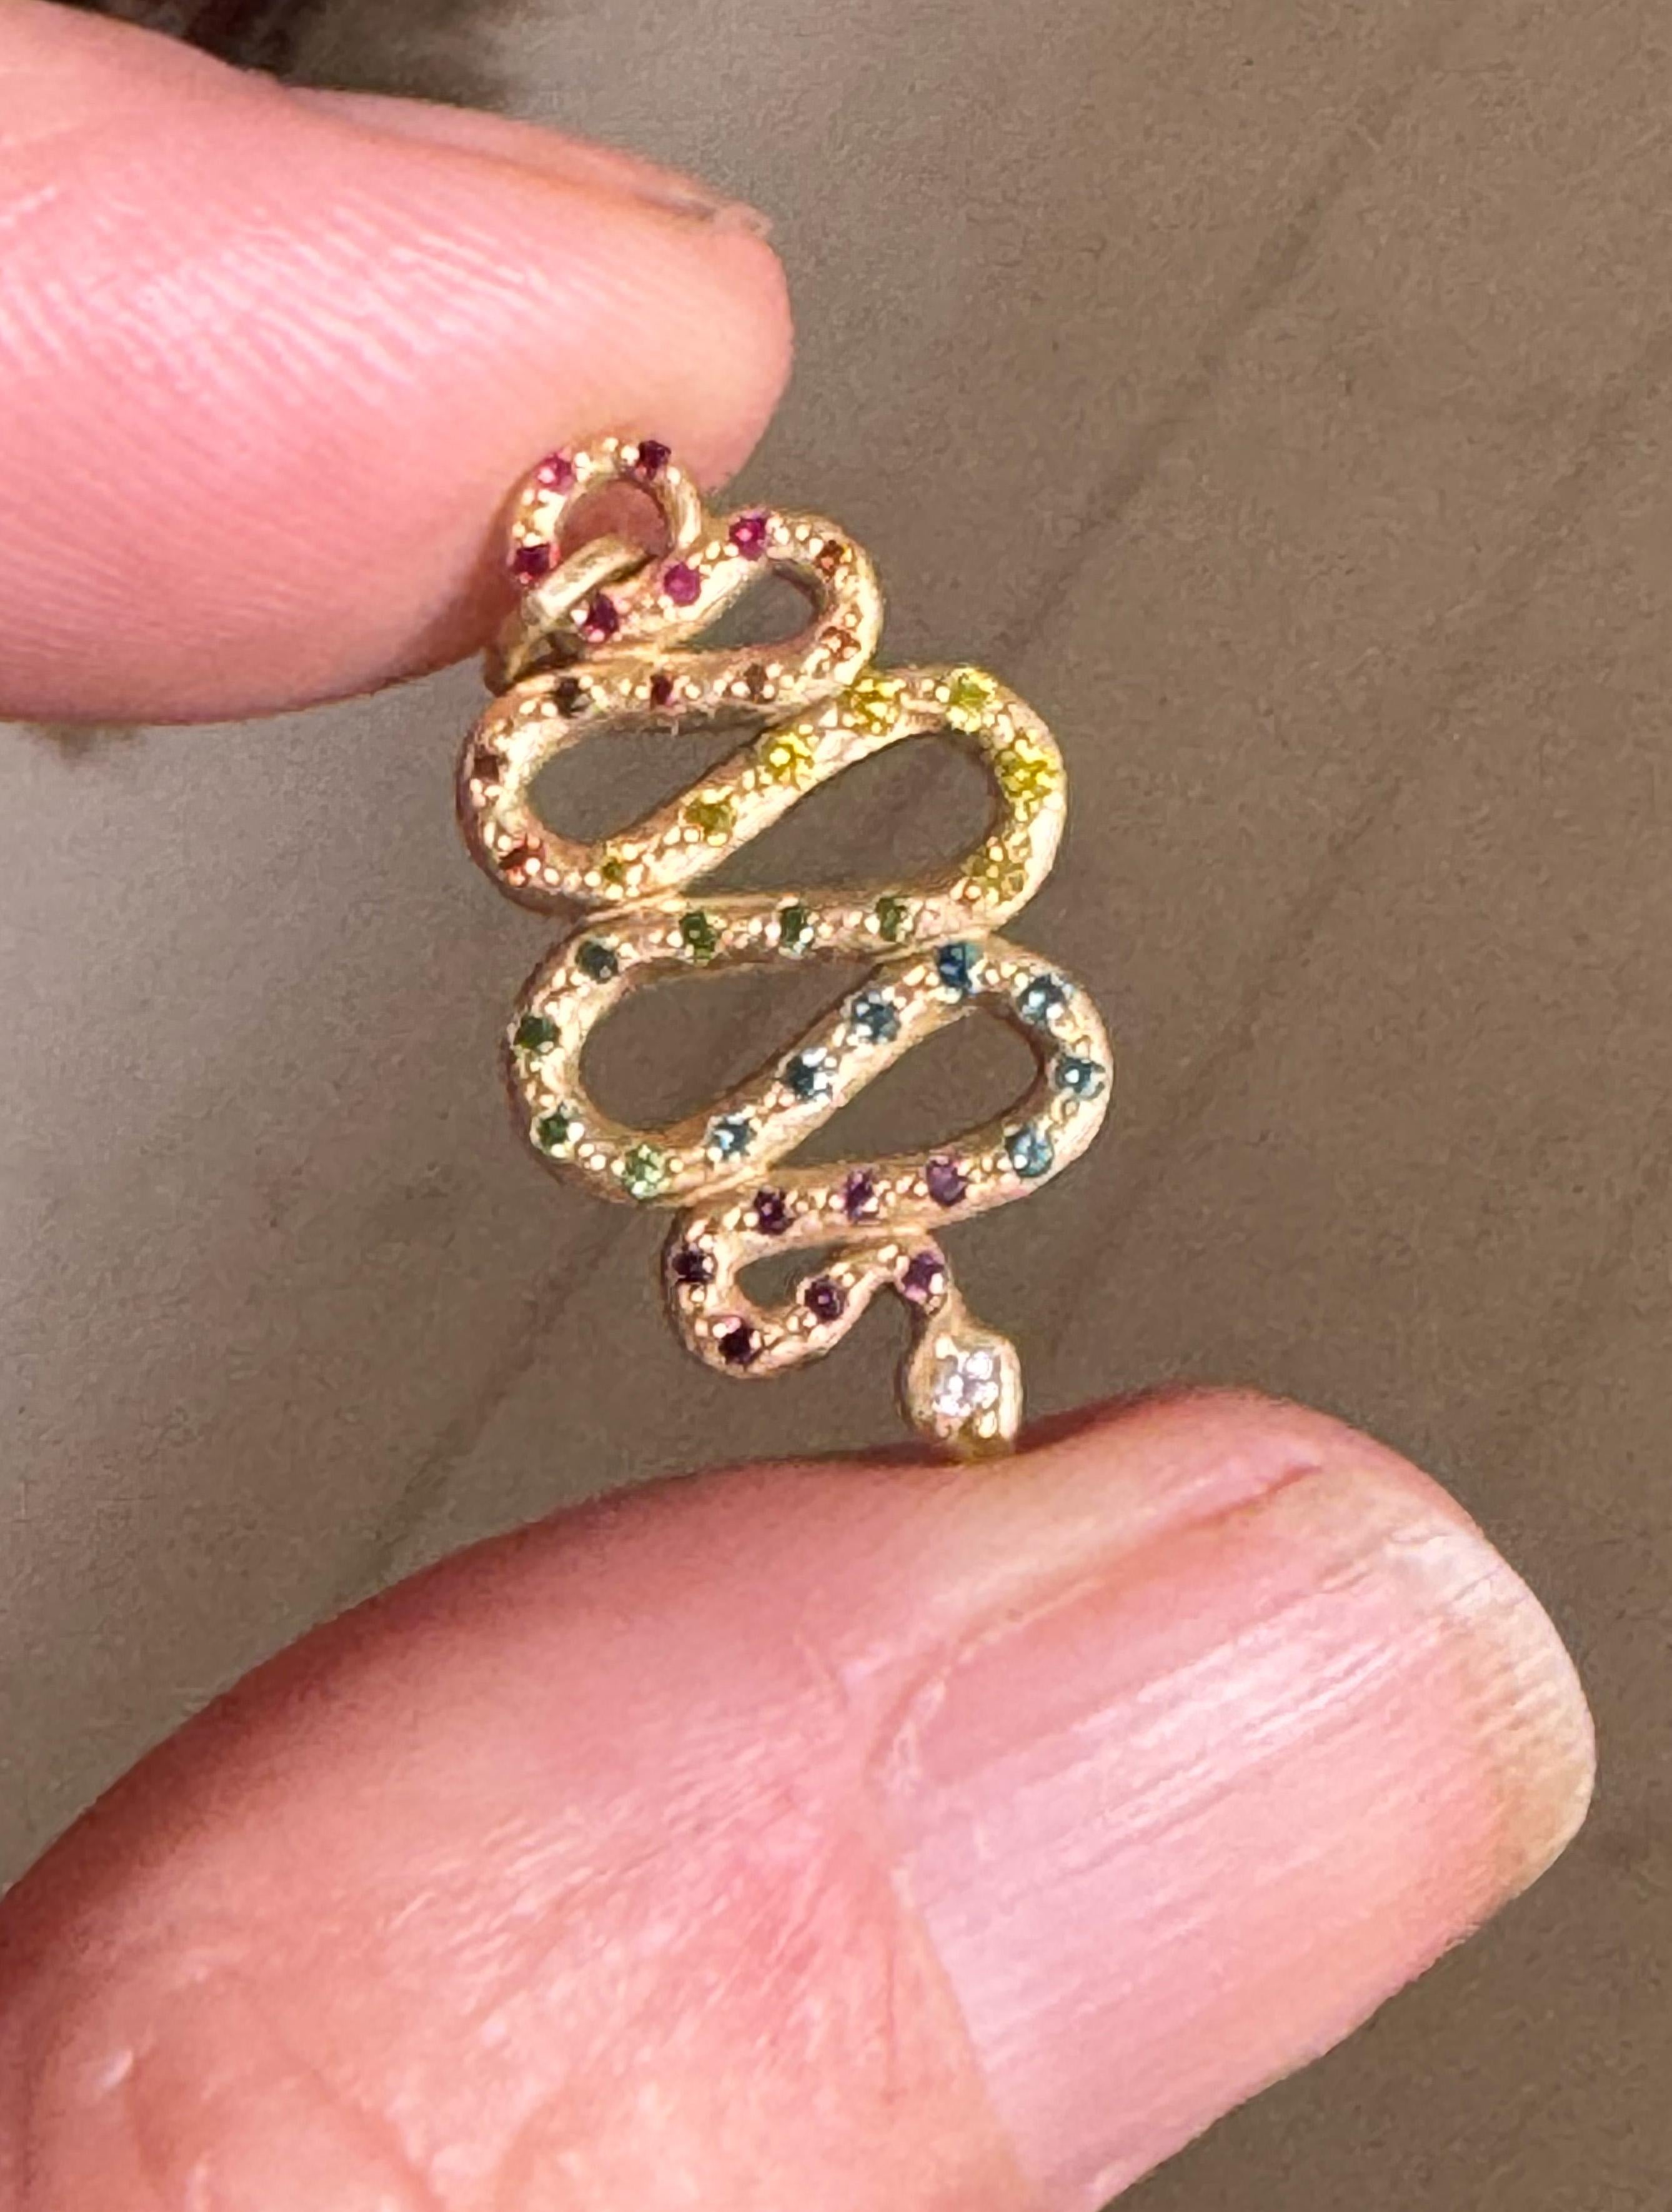 The Rainbow Serpent amulet is made with 18ct Fairtrade gold and rainbow coloured diamonds and rubies.  This is the mini version of the original.

For 7 years I have entered the dream time during ceremonies being led by an indigenous tribal elder